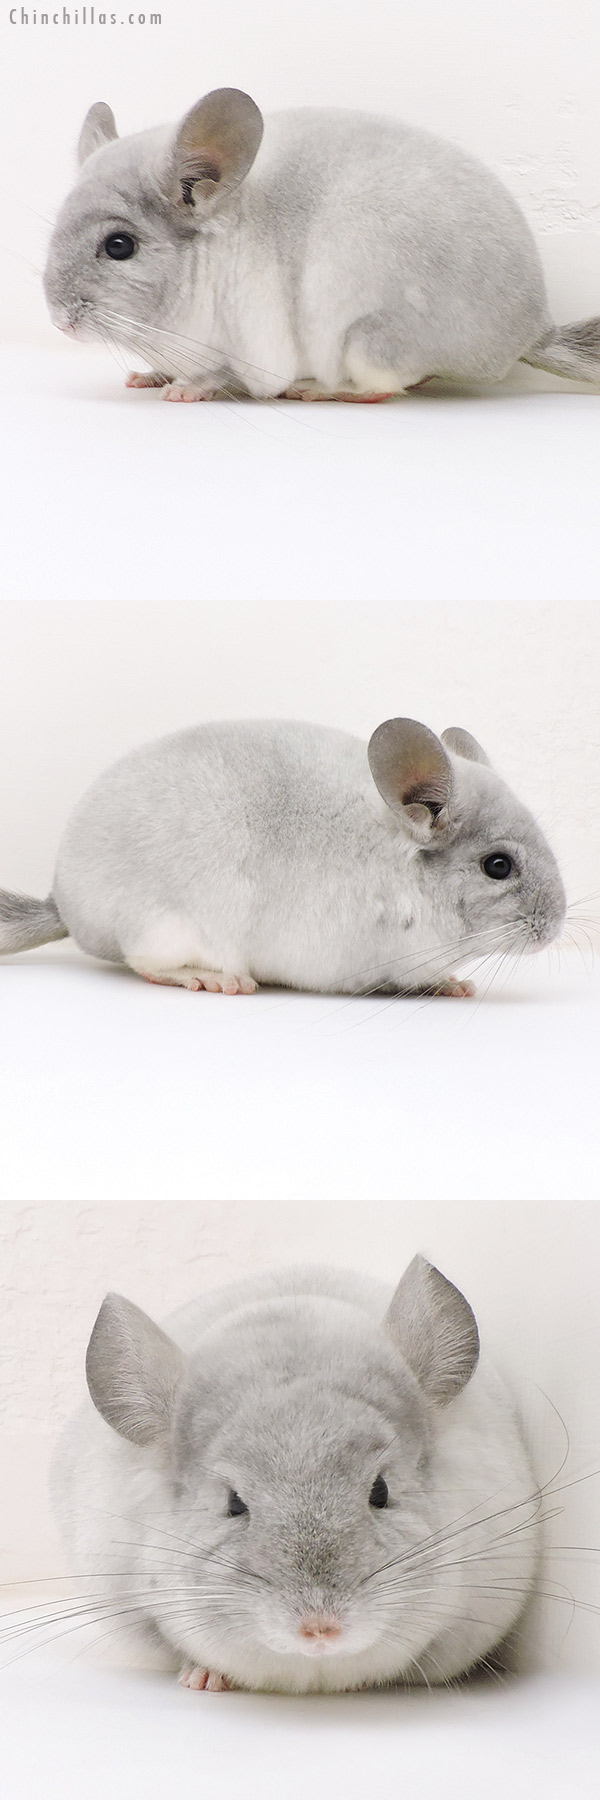 Chinchilla or related item offered for sale or export on Chinchillas.com - 17156 Show Quality TOV Violet & White Mosaic Female Chinchilla